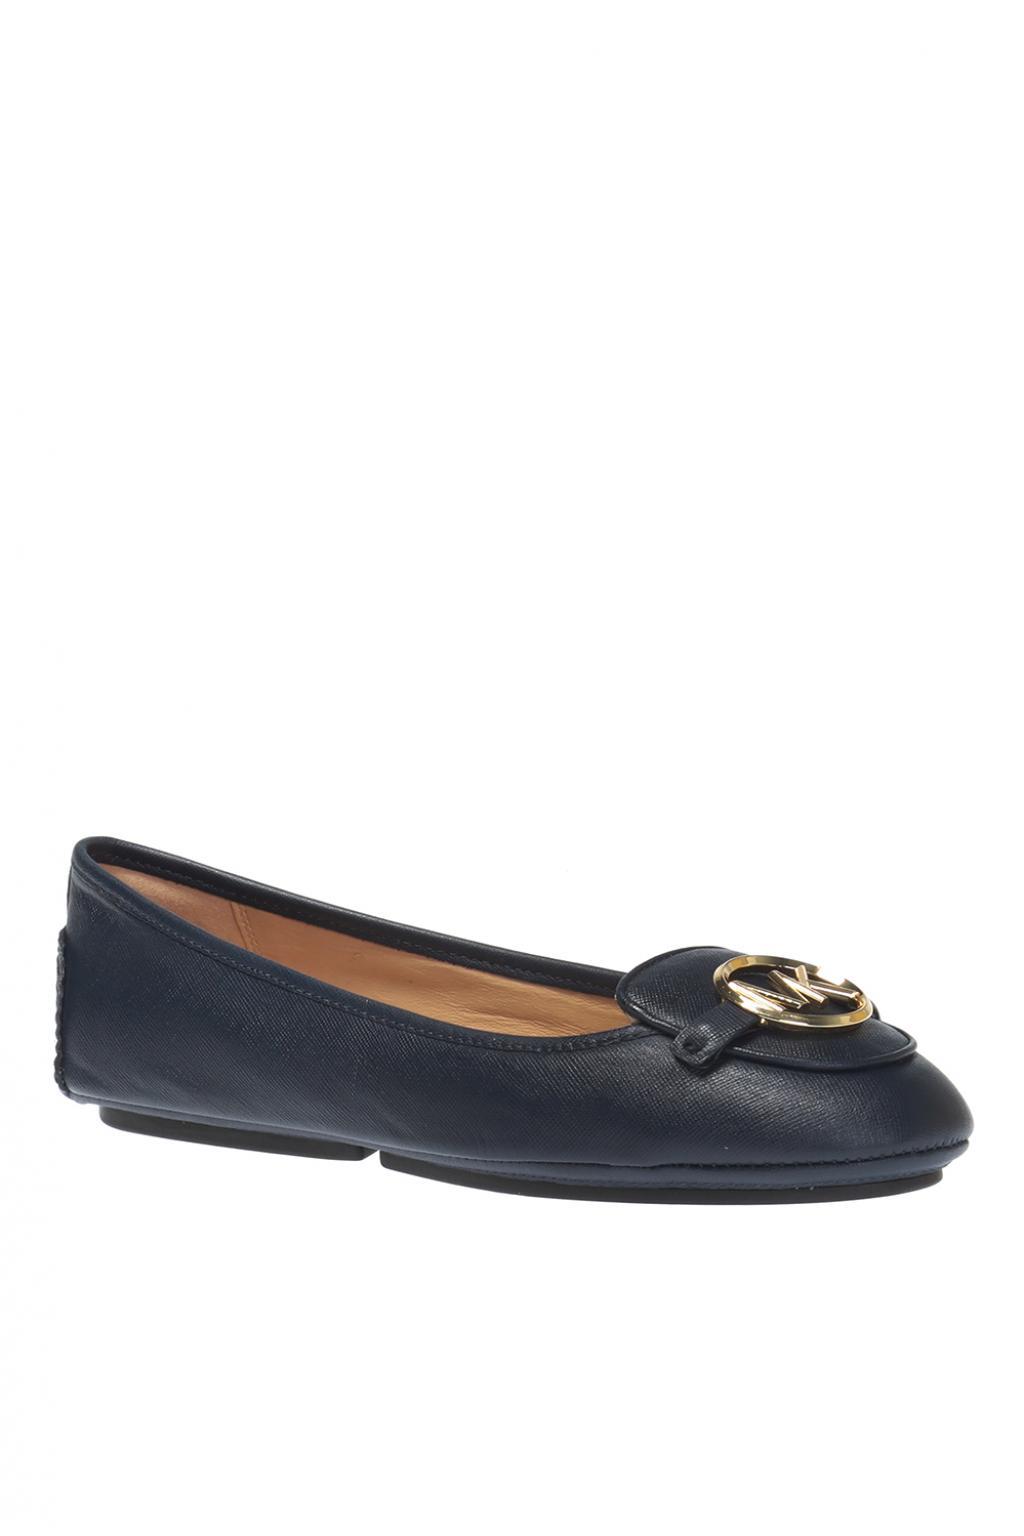 Michael Kors Leather 'lillie' Ballet Flats in Navy Blue (Blue) - Lyst